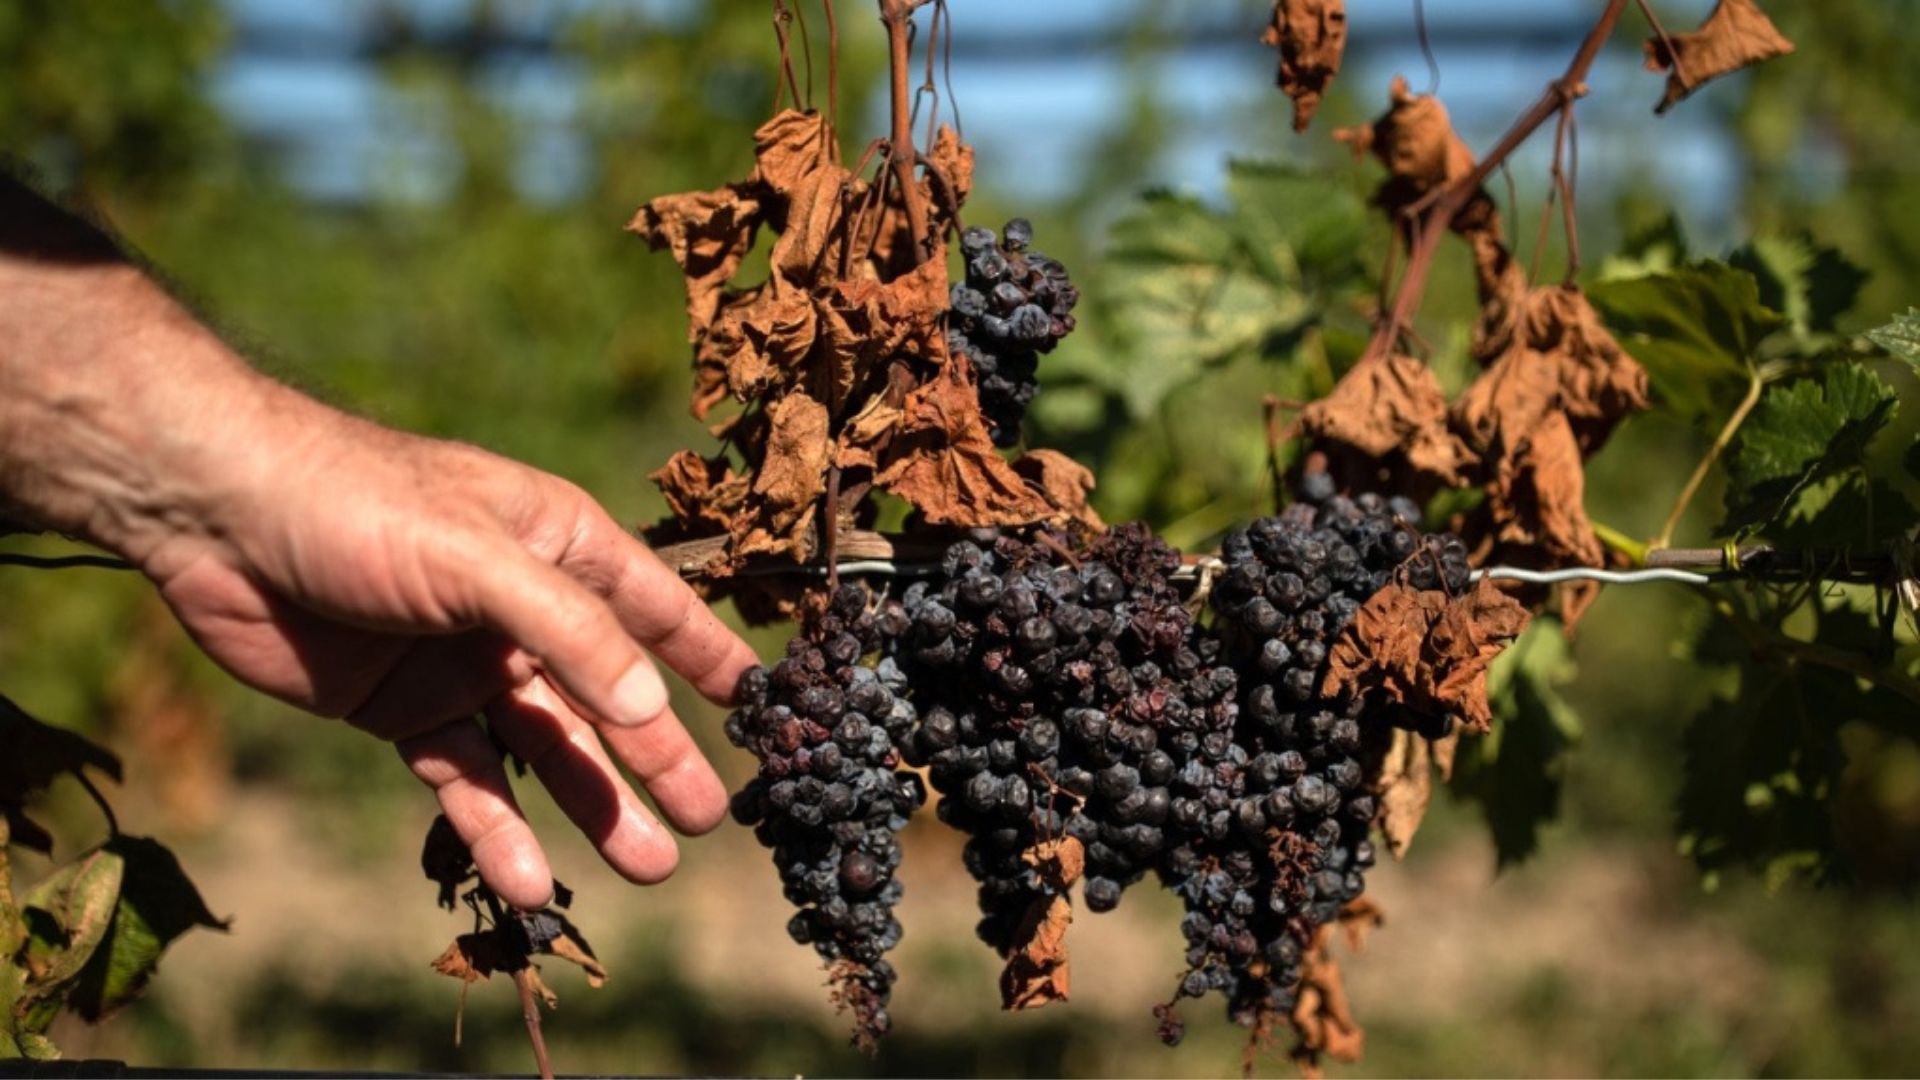 a person picking wilting grapes showing the influence of climate on wine